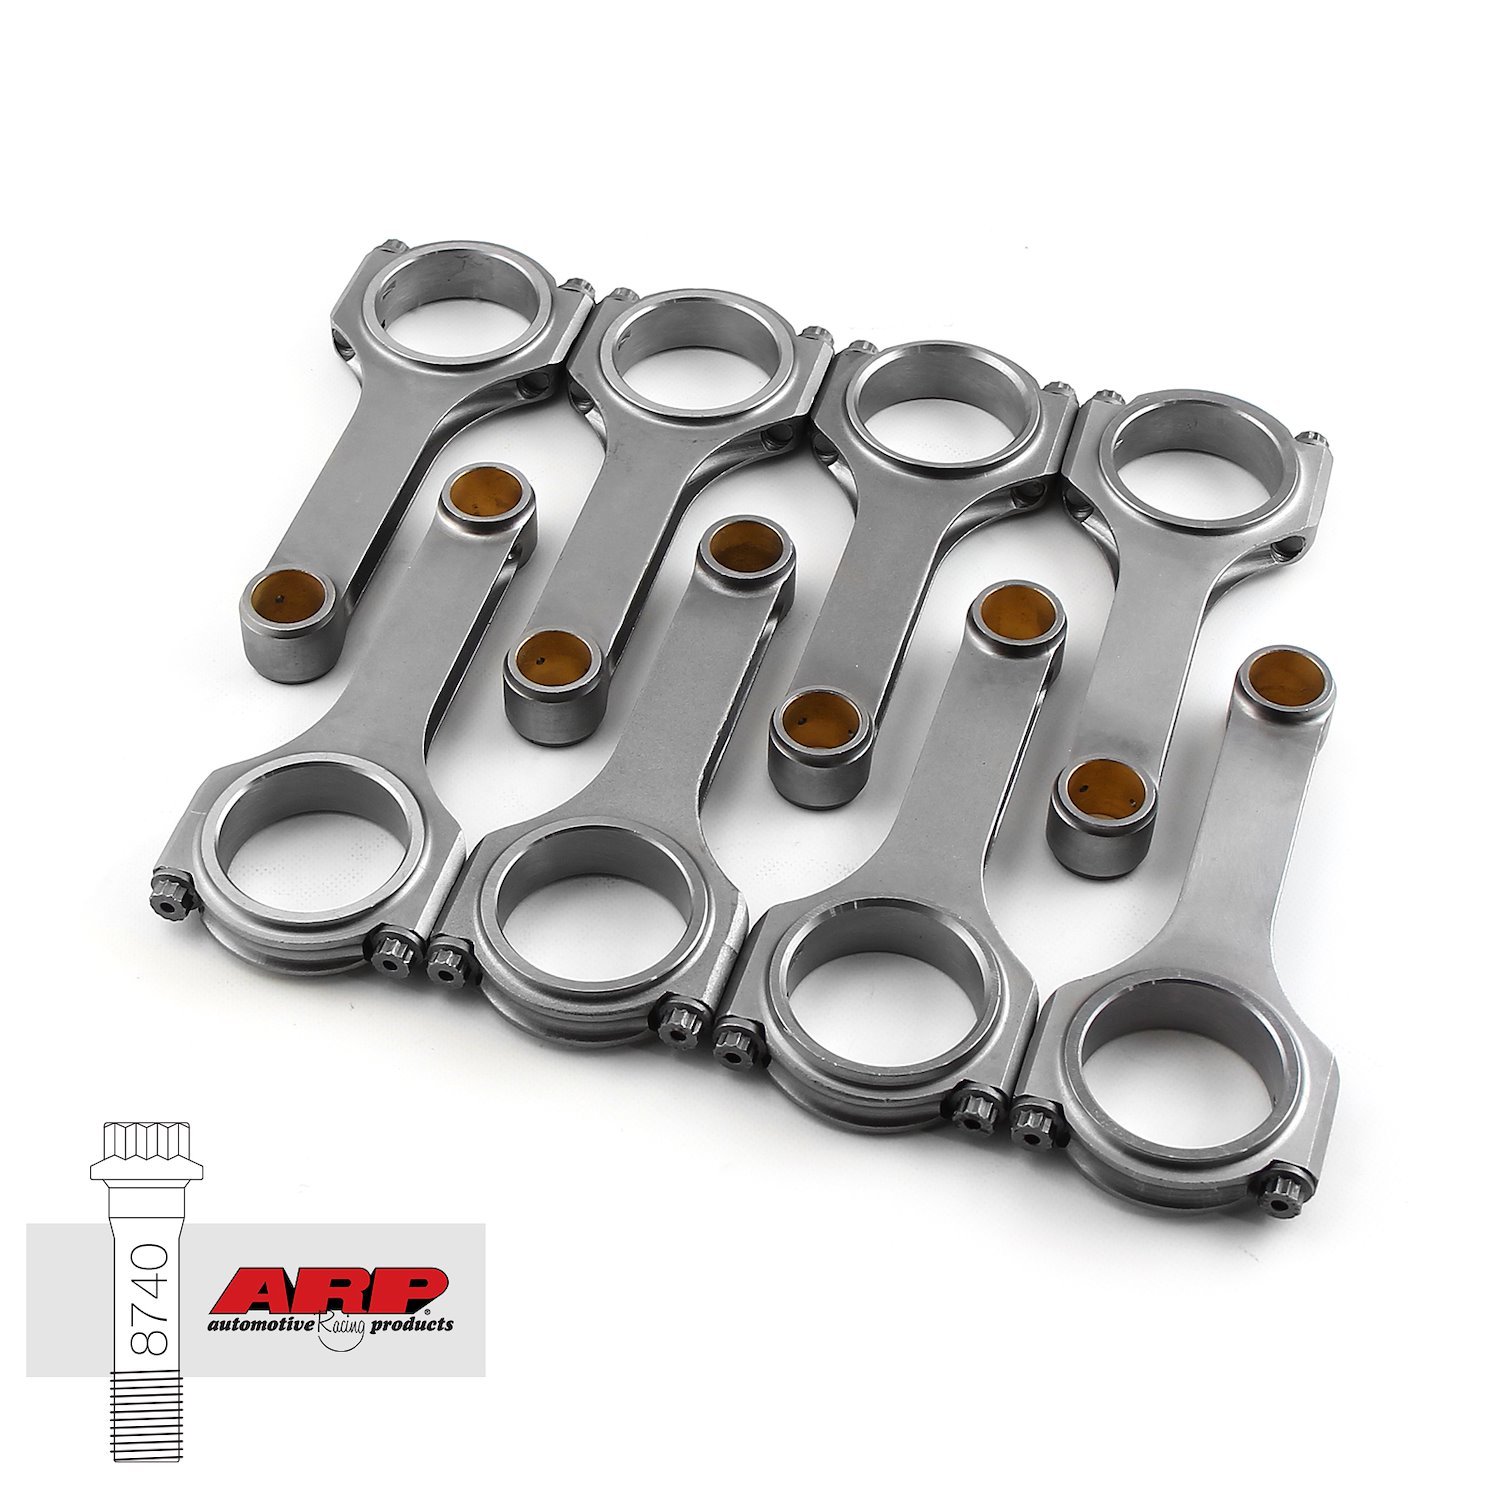 H BEAM 5.956 2.310 .912 4340 CONNECTING RODS FORD 351 WINDSOR W/ ARP 8740